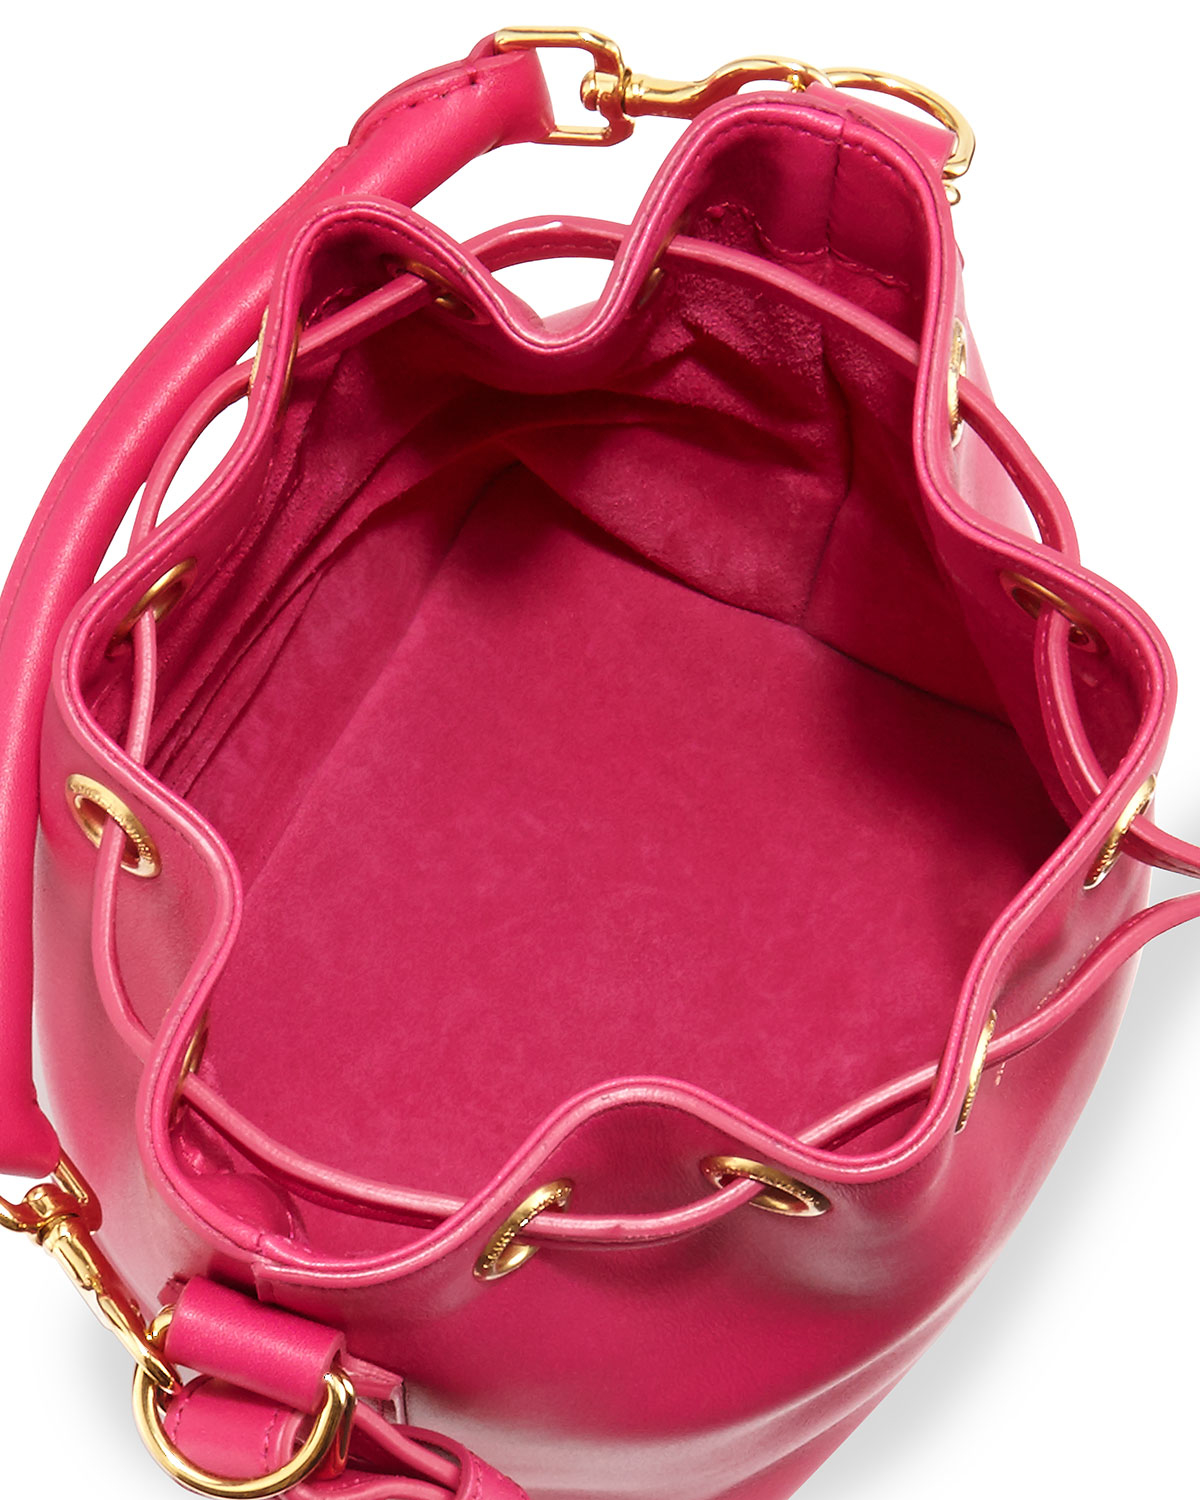 Saint laurent Small Leather Bucket Bag in Pink (fuchsia) | Lyst